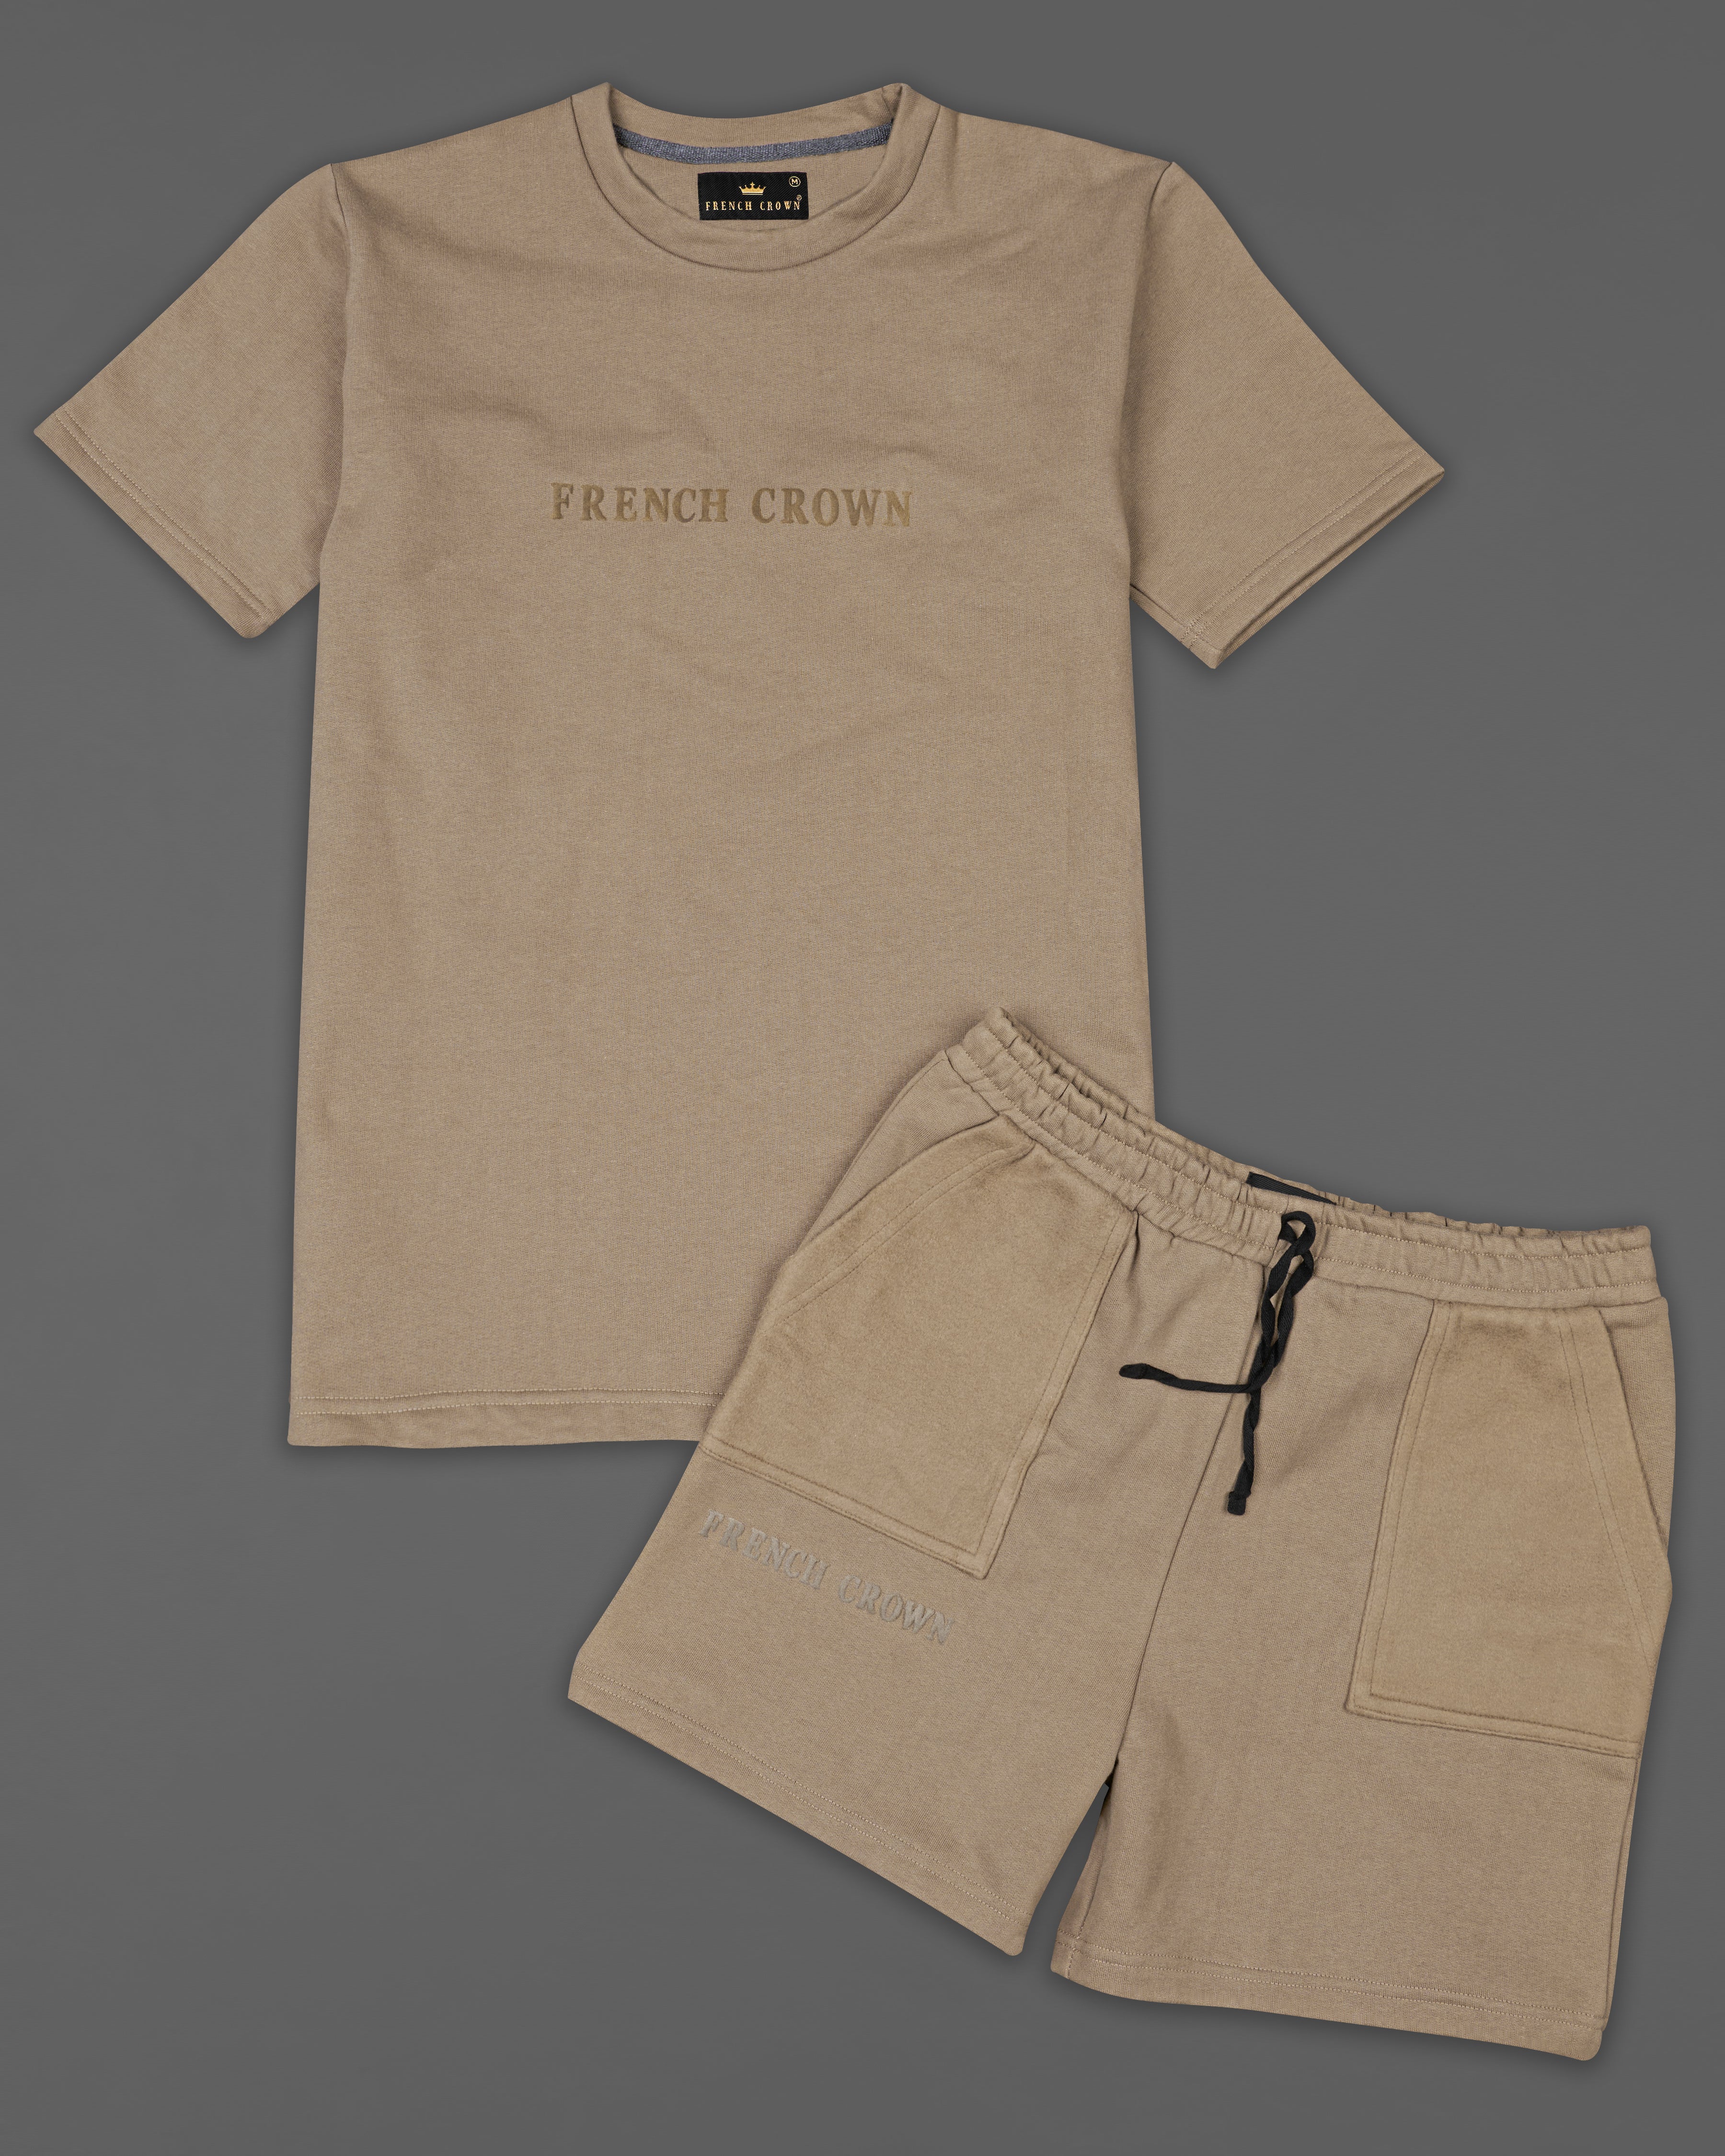 Pale Oyster Brown Premium Cotton T-shirt with Shorts Combo TS695-SR173-S, TS695-SR173-M, TS695-SR173-L, TS695-SR173-XL, TS695-SR173-XXL